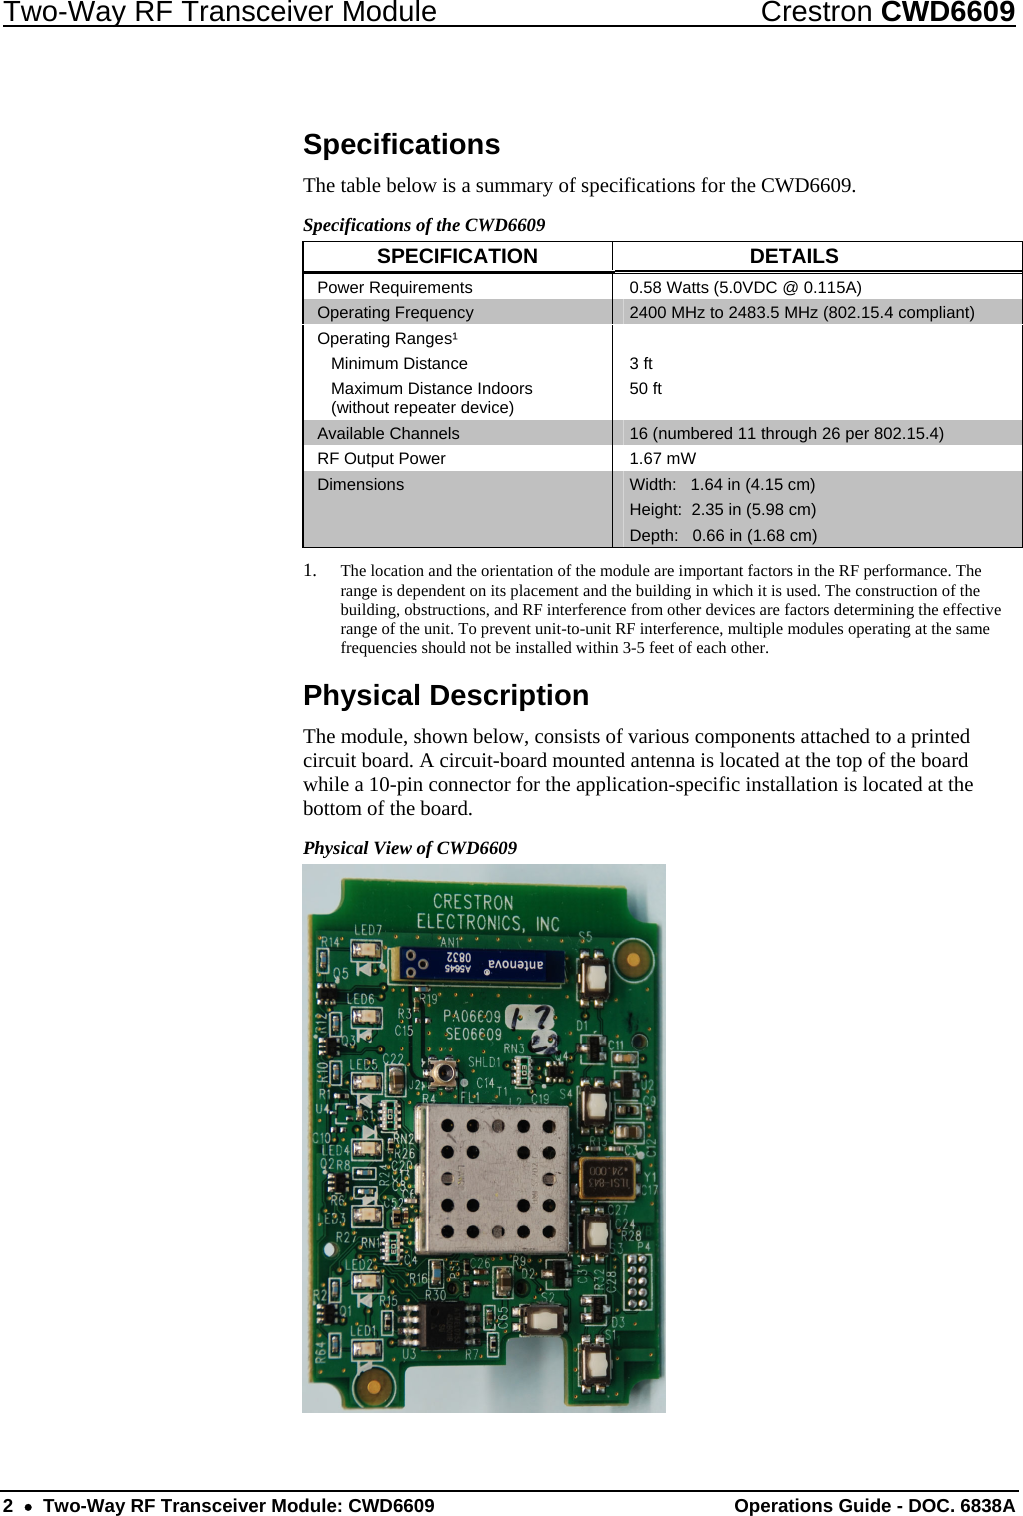 Two-Way RF Transceiver Module  Crestron CWD6609 Specifications The table below is a summary of specifications for the CWD6609.  Specifications of the CWD6609 SPECIFICATION DETAILS Power Requirements  0.58 Watts (5.0VDC @ 0.115A) Operating Frequency  2400 MHz to 2483.5 MHz (802.15.4 compliant) Operating Ranges¹  Minimum Distance   Maximum Distance Indoors    (without repeater device)  3 ft 50 ft  Available Channels  16 (numbered 11 through 26 per 802.15.4)  RF Output Power  1.67 mW Dimensions  Width:   1.64 in (4.15 cm) Height:  2.35 in (5.98 cm) Depth:   0.66 in (1.68 cm) 1. The location and the orientation of the module are important factors in the RF performance. The range is dependent on its placement and the building in which it is used. The construction of the building, obstructions, and RF interference from other devices are factors determining the effective range of the unit. To prevent unit-to-unit RF interference, multiple modules operating at the same frequencies should not be installed within 3-5 feet of each other. Physical Description The module, shown below, consists of various components attached to a printed circuit board. A circuit-board mounted antenna is located at the top of the board while a 10-pin connector for the application-specific installation is located at the bottom of the board. Physical View of CWD6609  2  •  Two-Way RF Transceiver Module: CWD6609  Operations Guide - DOC. 6838A 